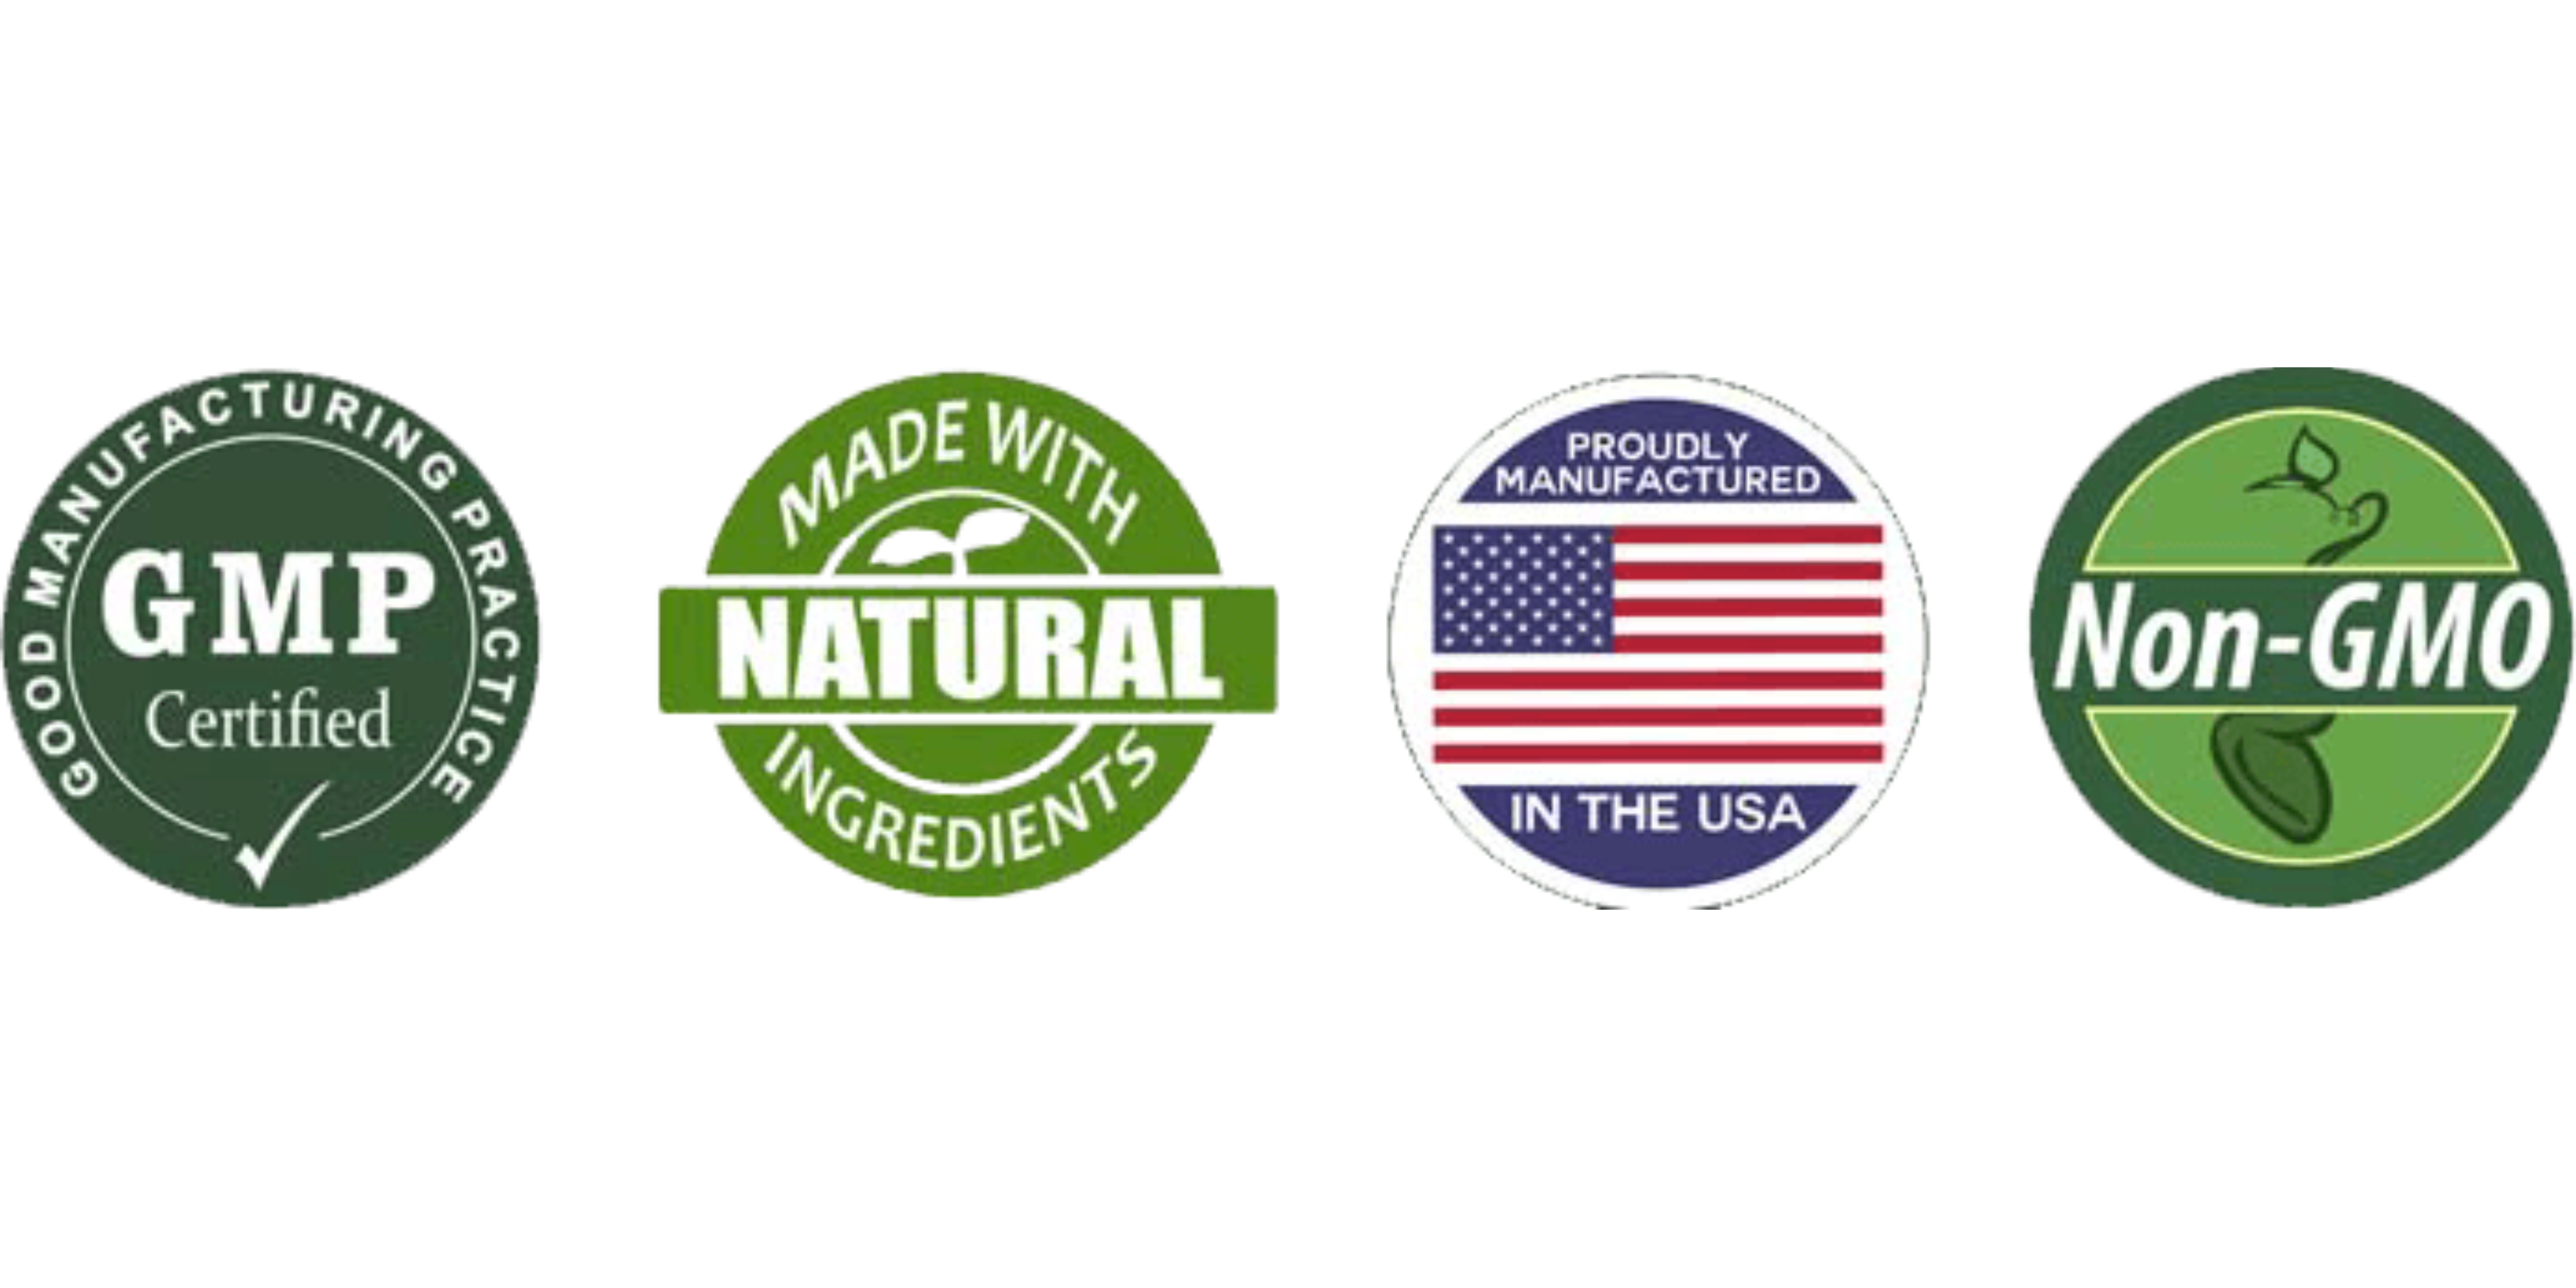 Certifications FDA, GMO-Free, Made in USA, GMP, 100% Natural Ingredients